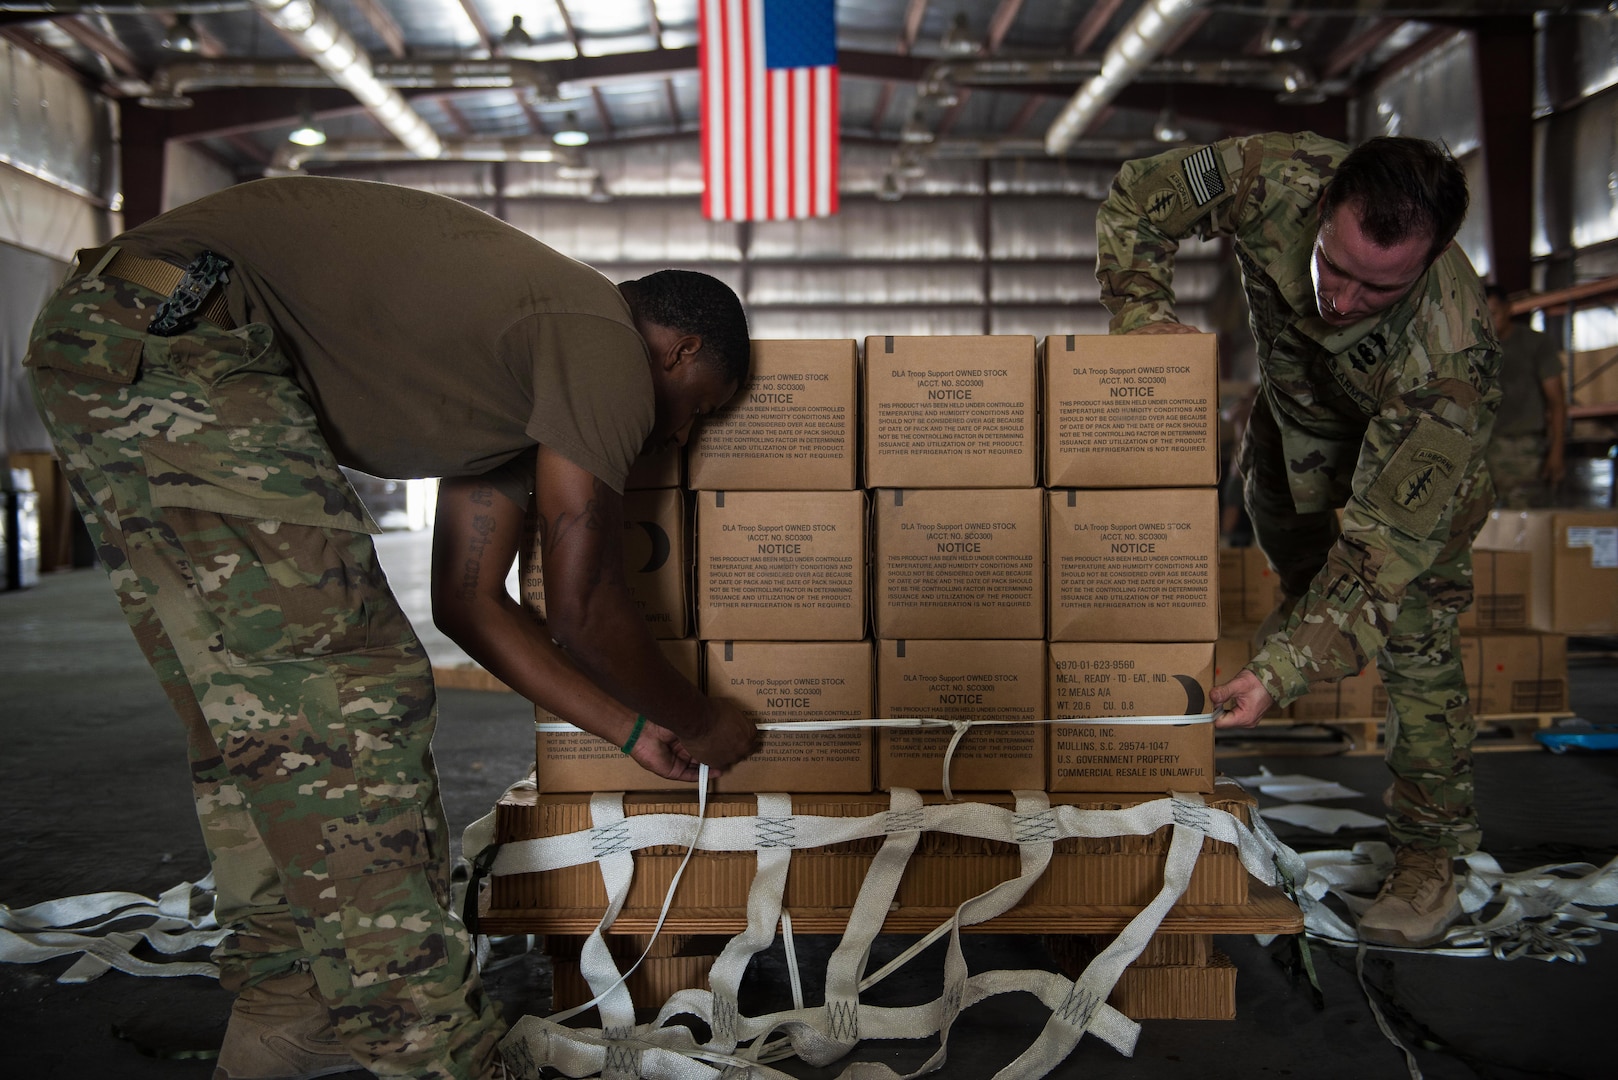 U.S. Army Sgt. Timothy Williams, a parachute rigger assigned to the 824th Quartermaster Company, and U.S. Army Staff Sgt. Justin Devaul, a parachute rigger assigned to an Army special operations forces unit, work together to build an airdrop bundle of meals, ready-to-eat for forward deployed troops at an undisclosed location in Southwest Asia, Sept. 6, 2017. Airdrop bundles are rigged within specific guidelines to ensure the cargo properly exits the aircraft, the parachute properly deploys and the bundle lands intact on its target. (U.S. Air Force photo by Tech. Sgt. Jonathan Hehnly)